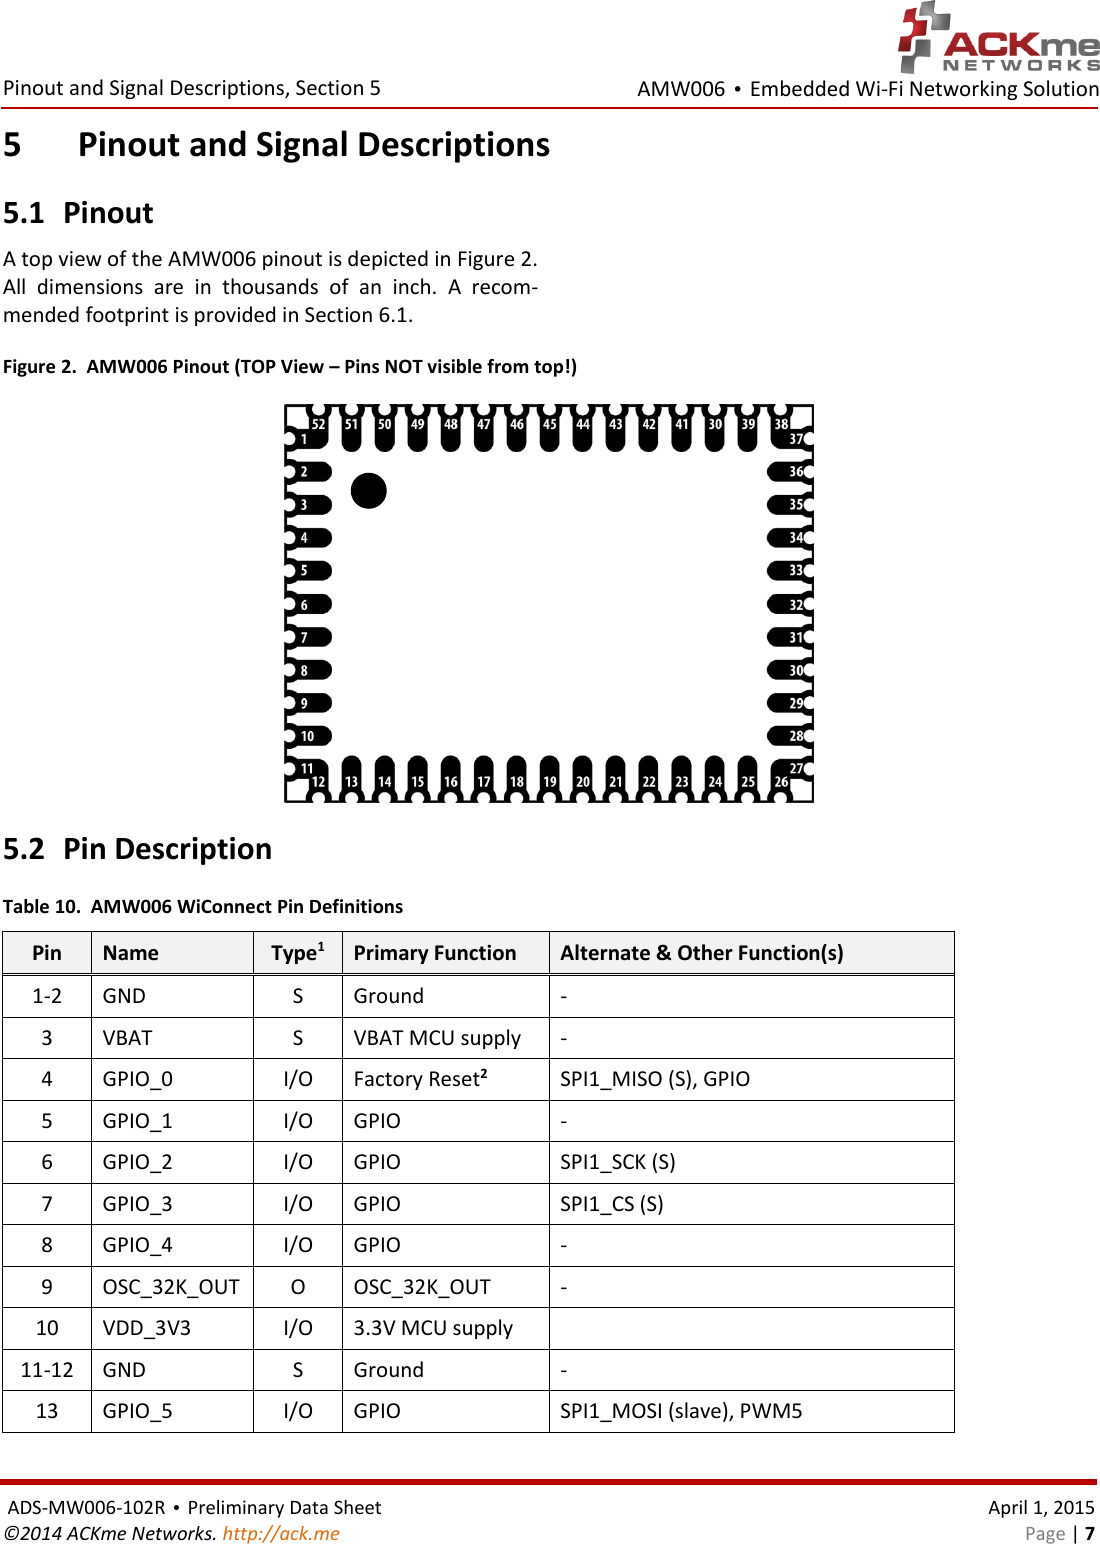 AMW006 • Embedded Wi-Fi Networking Solution  Pinout and Signal Descriptions, Section 5  ADS-MW006-102R • Preliminary Data Sheet    April 1, 2015 ©2014 ACKme Networks. http://ack.me    Page | 7 5 Pinout and Signal Descriptions 5.1 Pinout A top view of the AMW006 pinout is depicted in Figure 2. All  dimensions  are  in  thousands  of  an  inch.  A  recom-mended footprint is provided in Section 6.1. Figure 2.  AMW006 Pinout (TOP View – Pins NOT visible from top!)  5.2 Pin Description Table 10.  AMW006 WiConnect Pin Definitions Pin Name Type1 Primary Function  Alternate &amp; Other Function(s) 1-2 GND S Ground - 3 VBAT S VBAT MCU supply - 4 GPIO_0 I/O Factory Reset2 SPI1_MISO (S), GPIO 5 GPIO_1 I/O GPIO - 6 GPIO_2 I/O GPIO SPI1_SCK (S) 7 GPIO_3 I/O GPIO SPI1_CS (S) 8 GPIO_4 I/O GPIO - 9 OSC_32K_OUT O OSC_32K_OUT - 10 VDD_3V3 I/O 3.3V MCU supply  11-12 GND S Ground - 13 GPIO_5 I/O GPIO SPI1_MOSI (slave), PWM5 